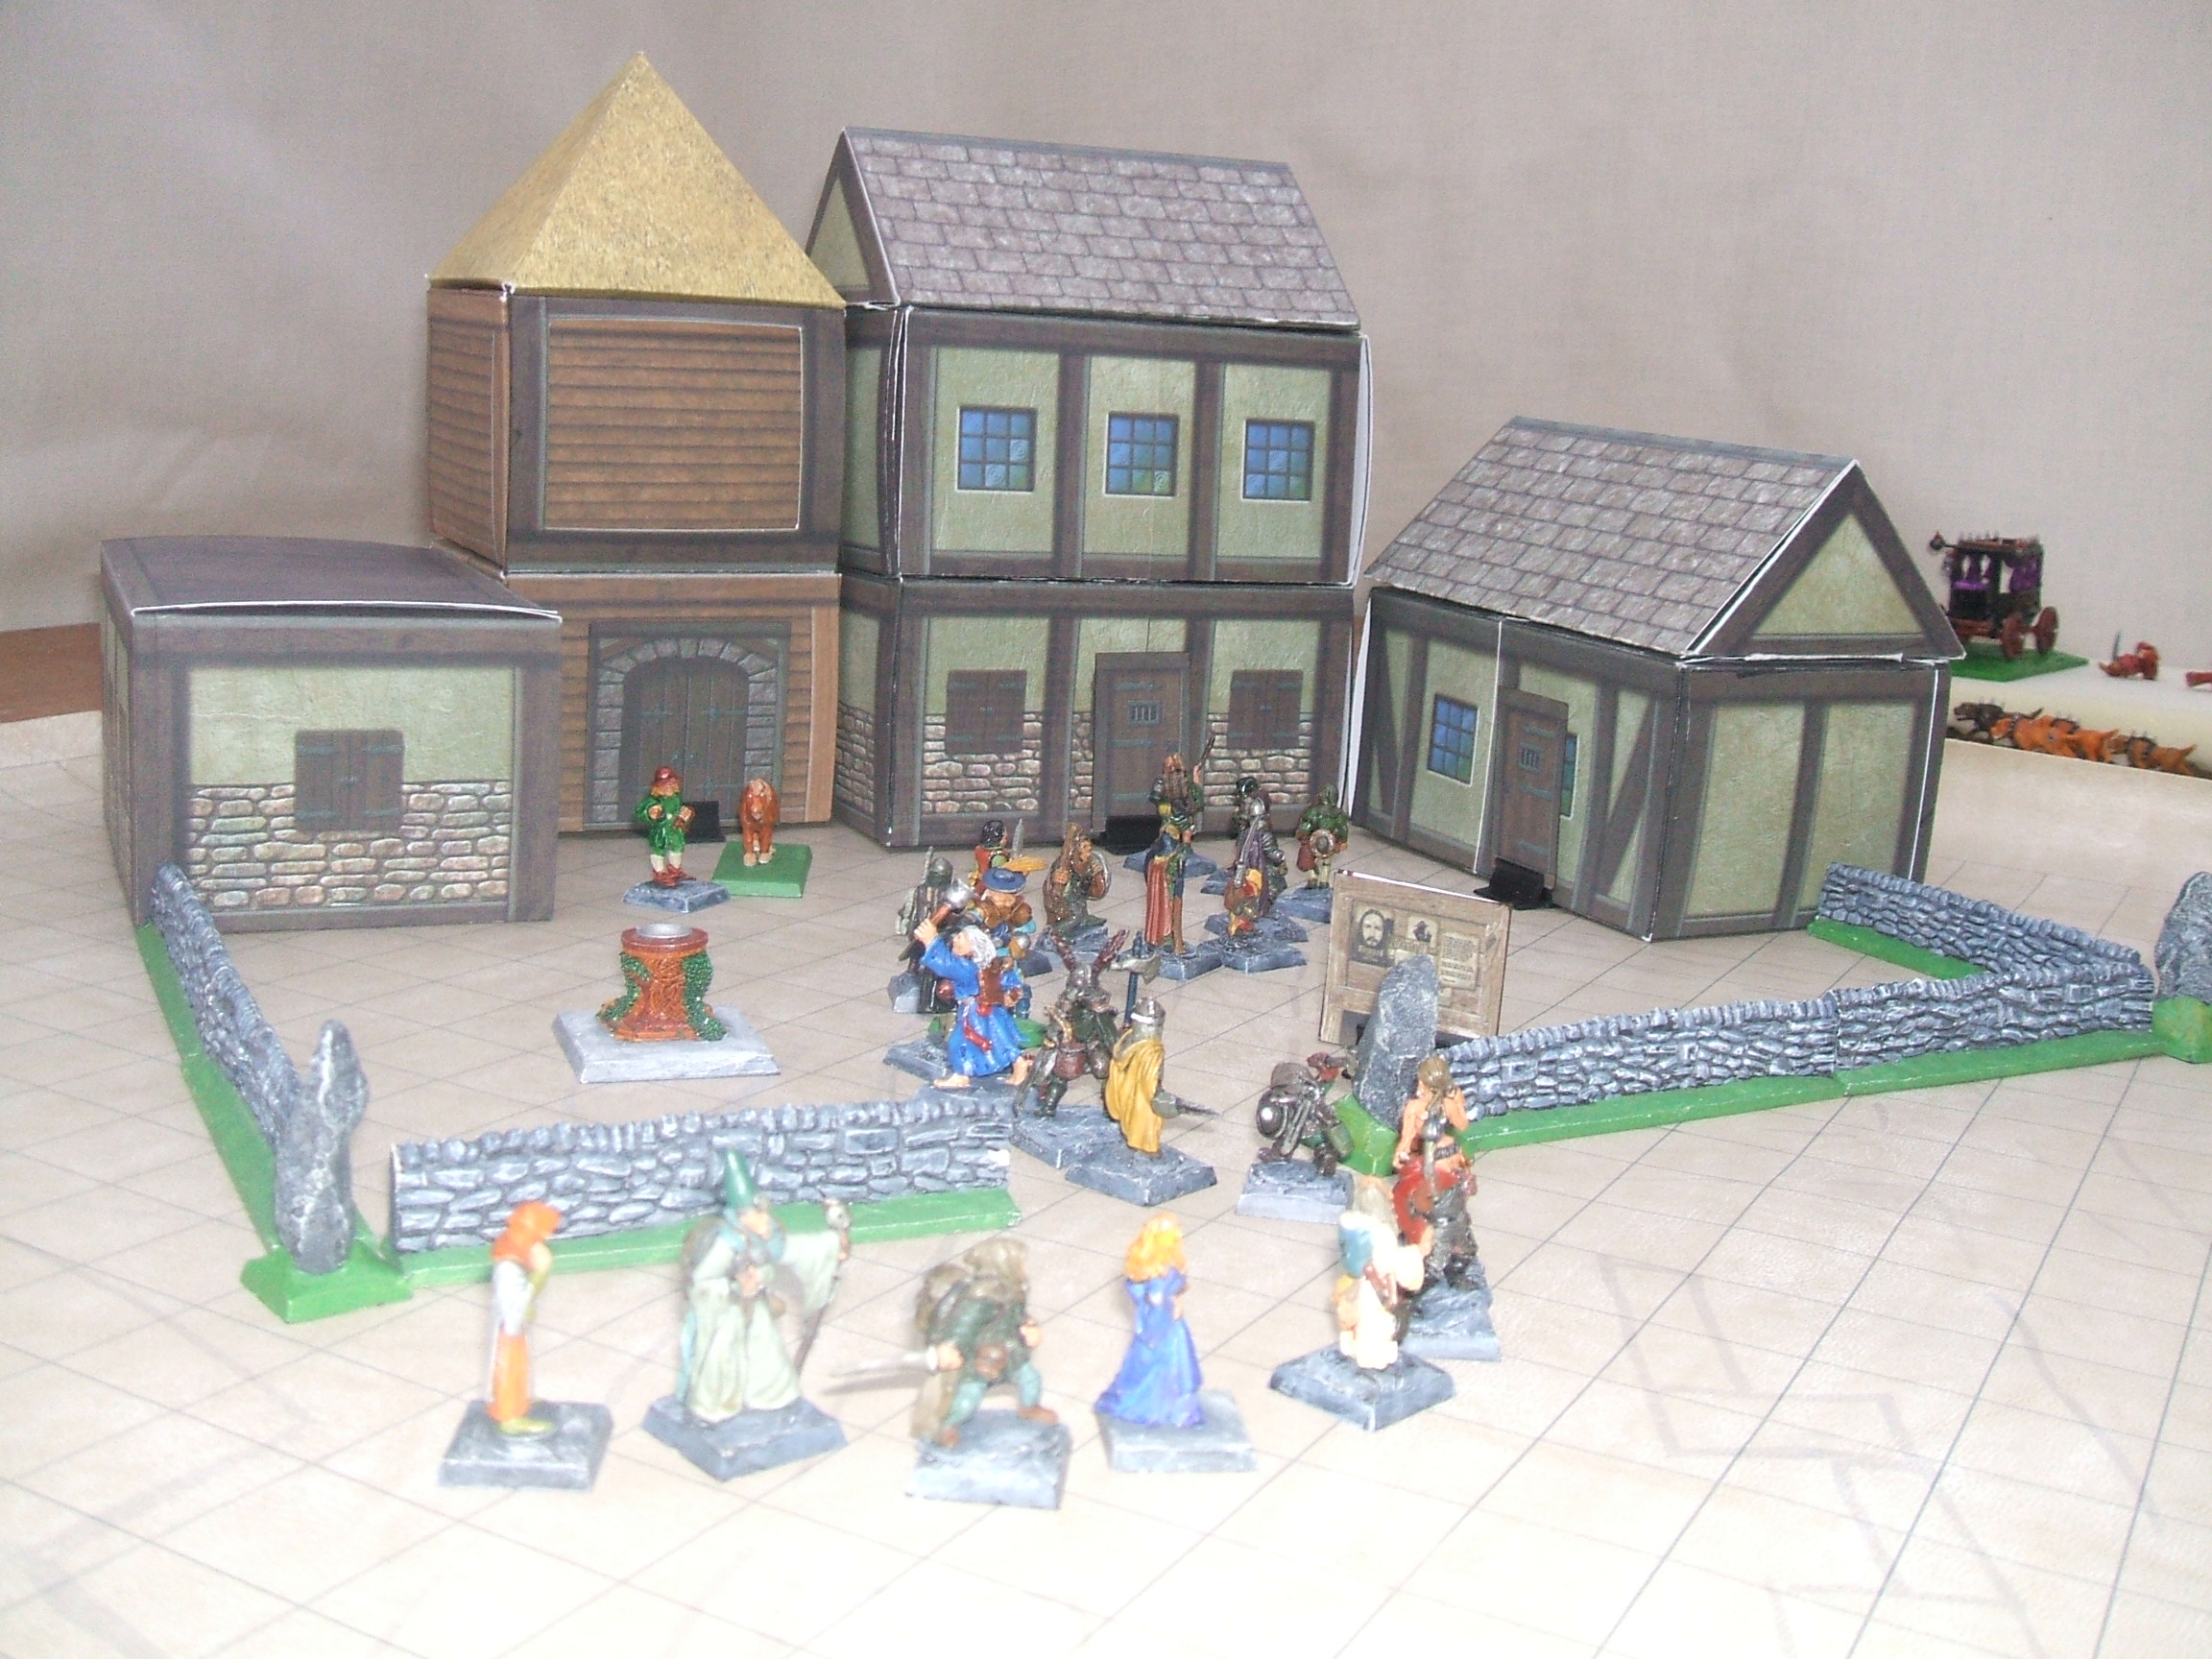 Tabletop Taverns Launched by Tabletop Towns